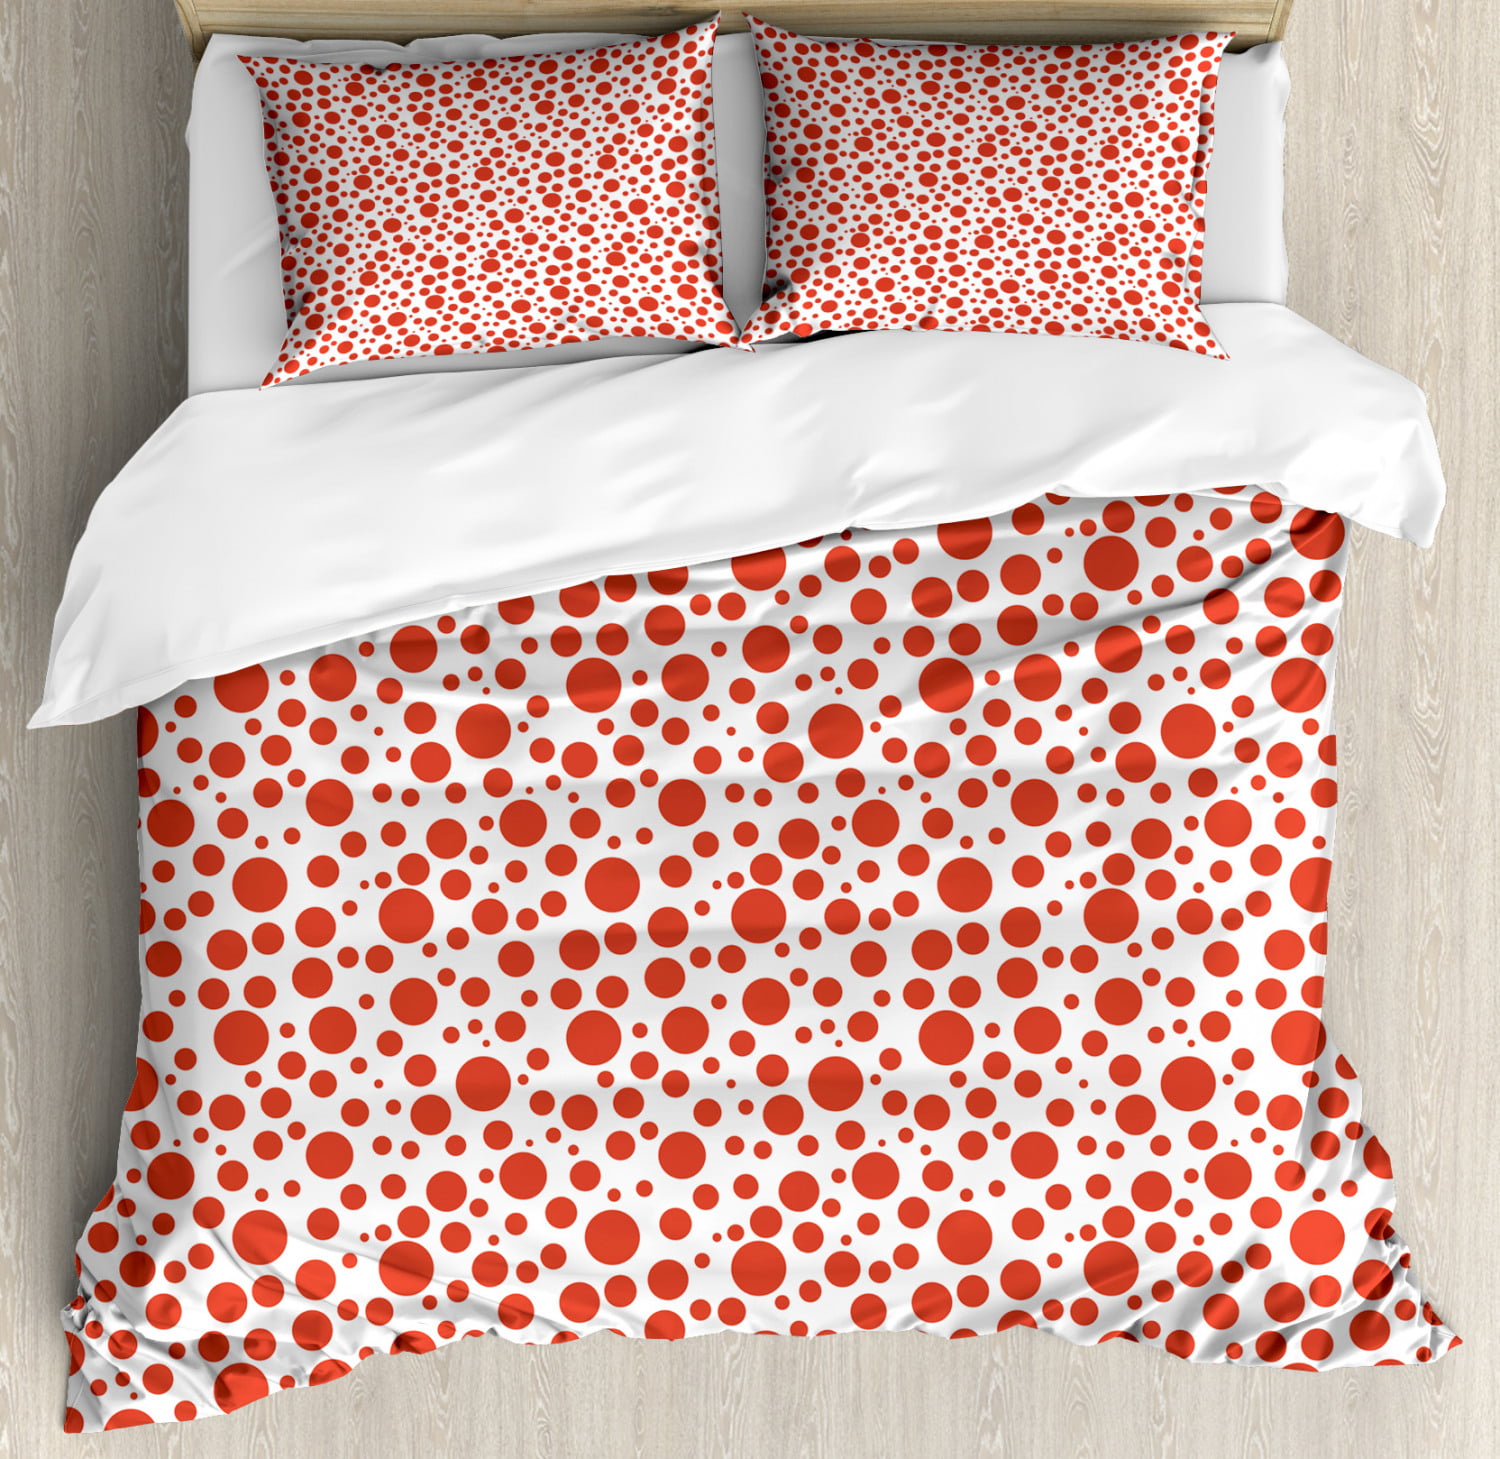 Abstract Duvet Cover Set Red Polka Dots On White Background